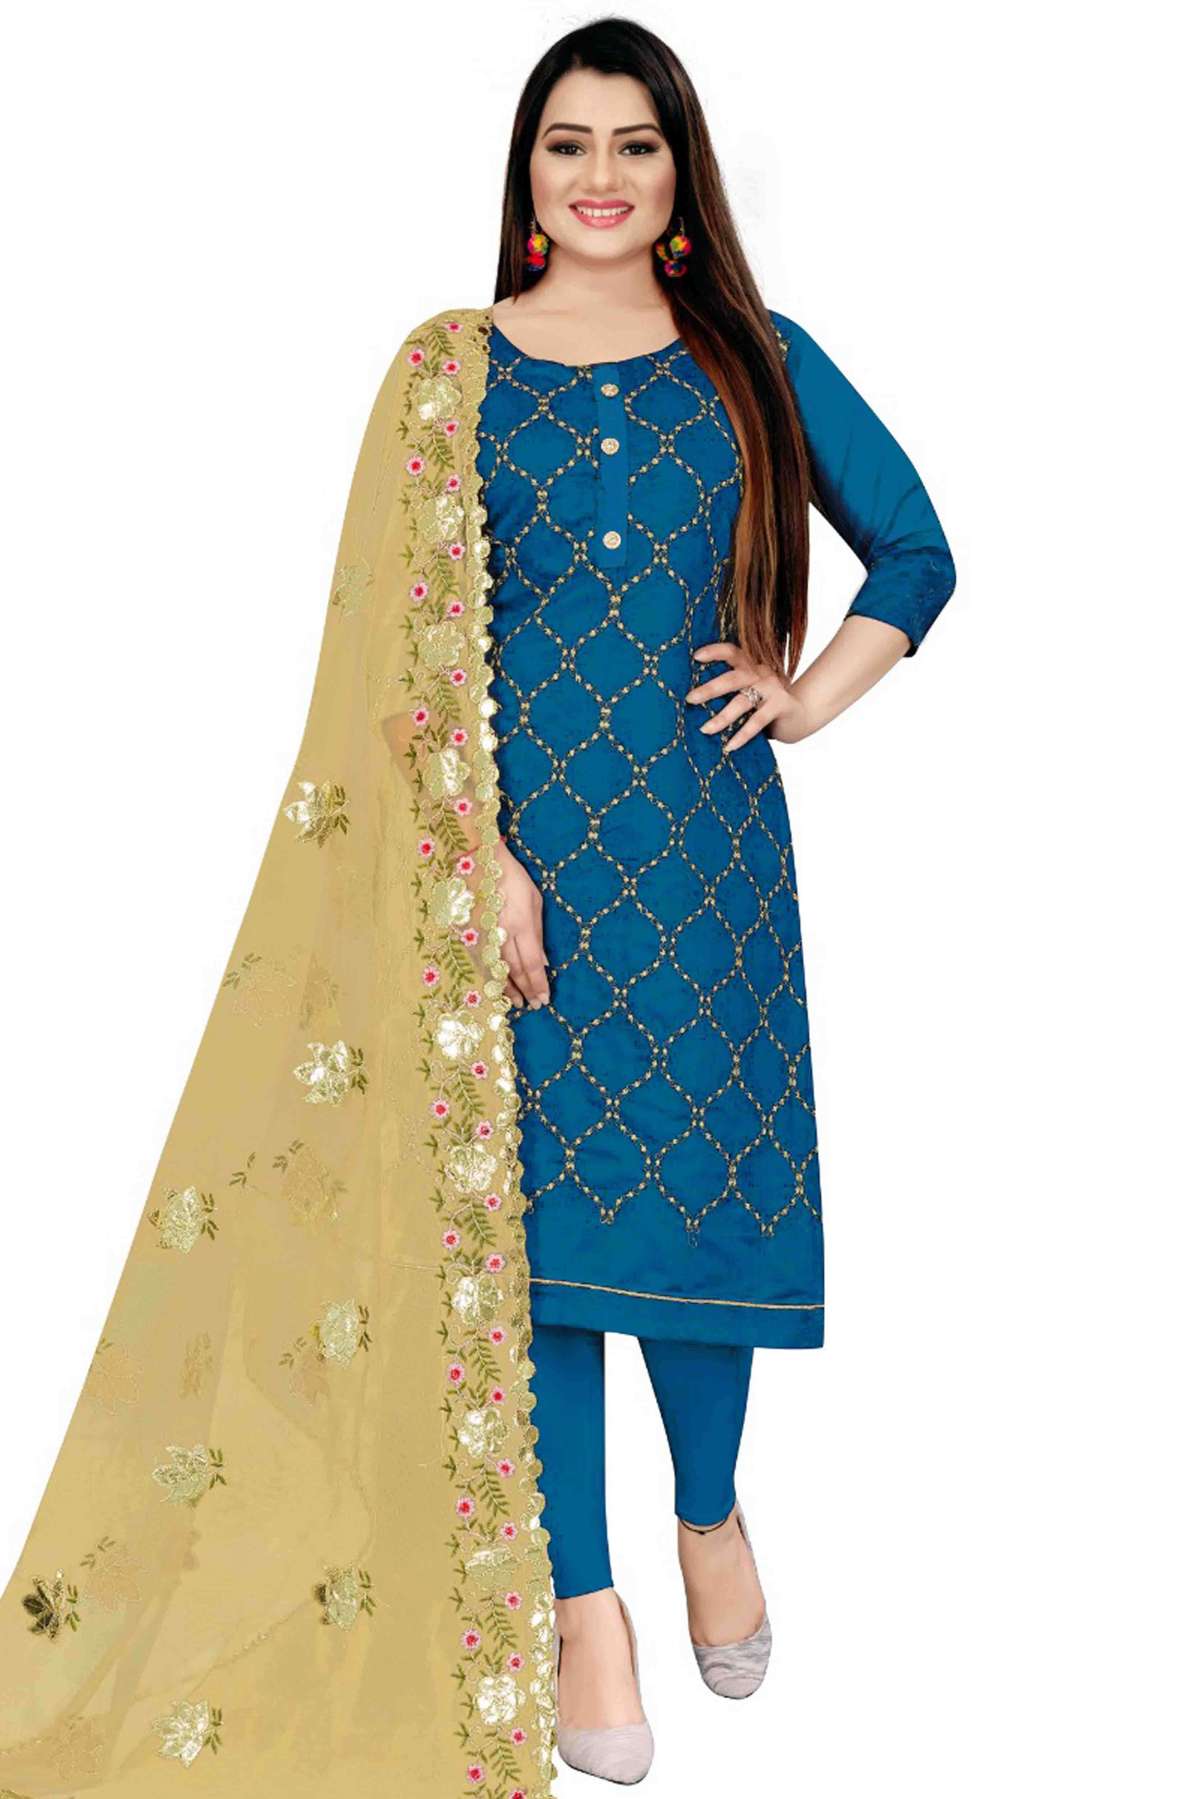 Unstitched Chanderi Embroidery Churidar Suit In Blue Colour - US3234360